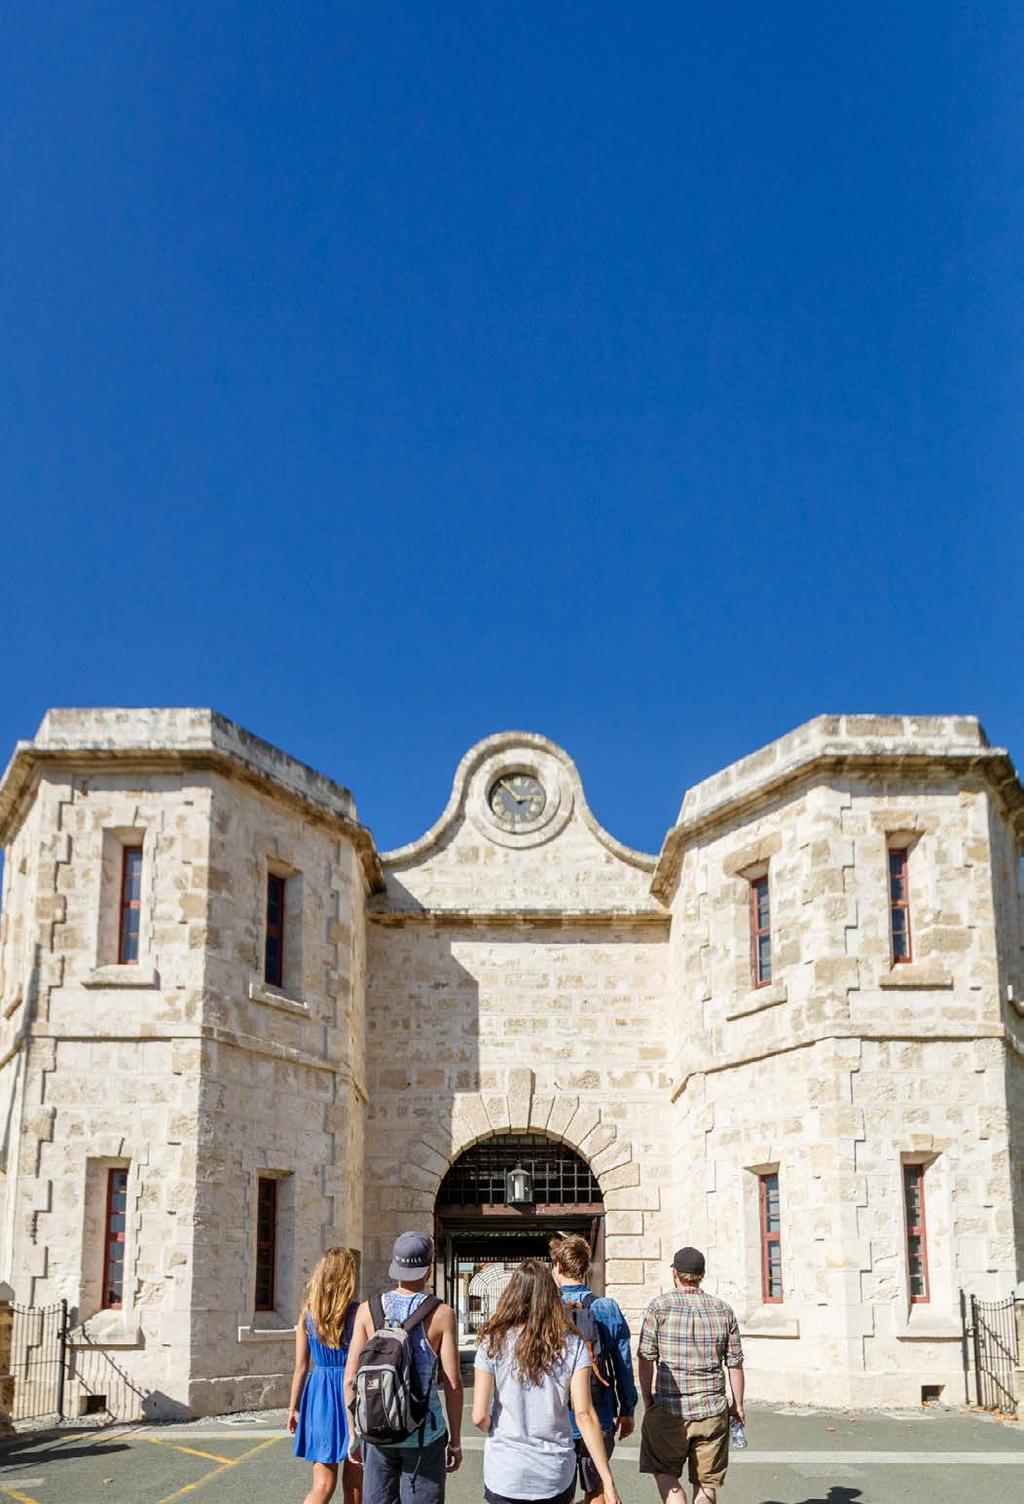 FREMANTLE PRISON YHA BUDGET GROUP ACCOMMODATION - 2019 Based in the World Heritage Listed Fremantle Prison, this property offers a truly unique experience for your group.